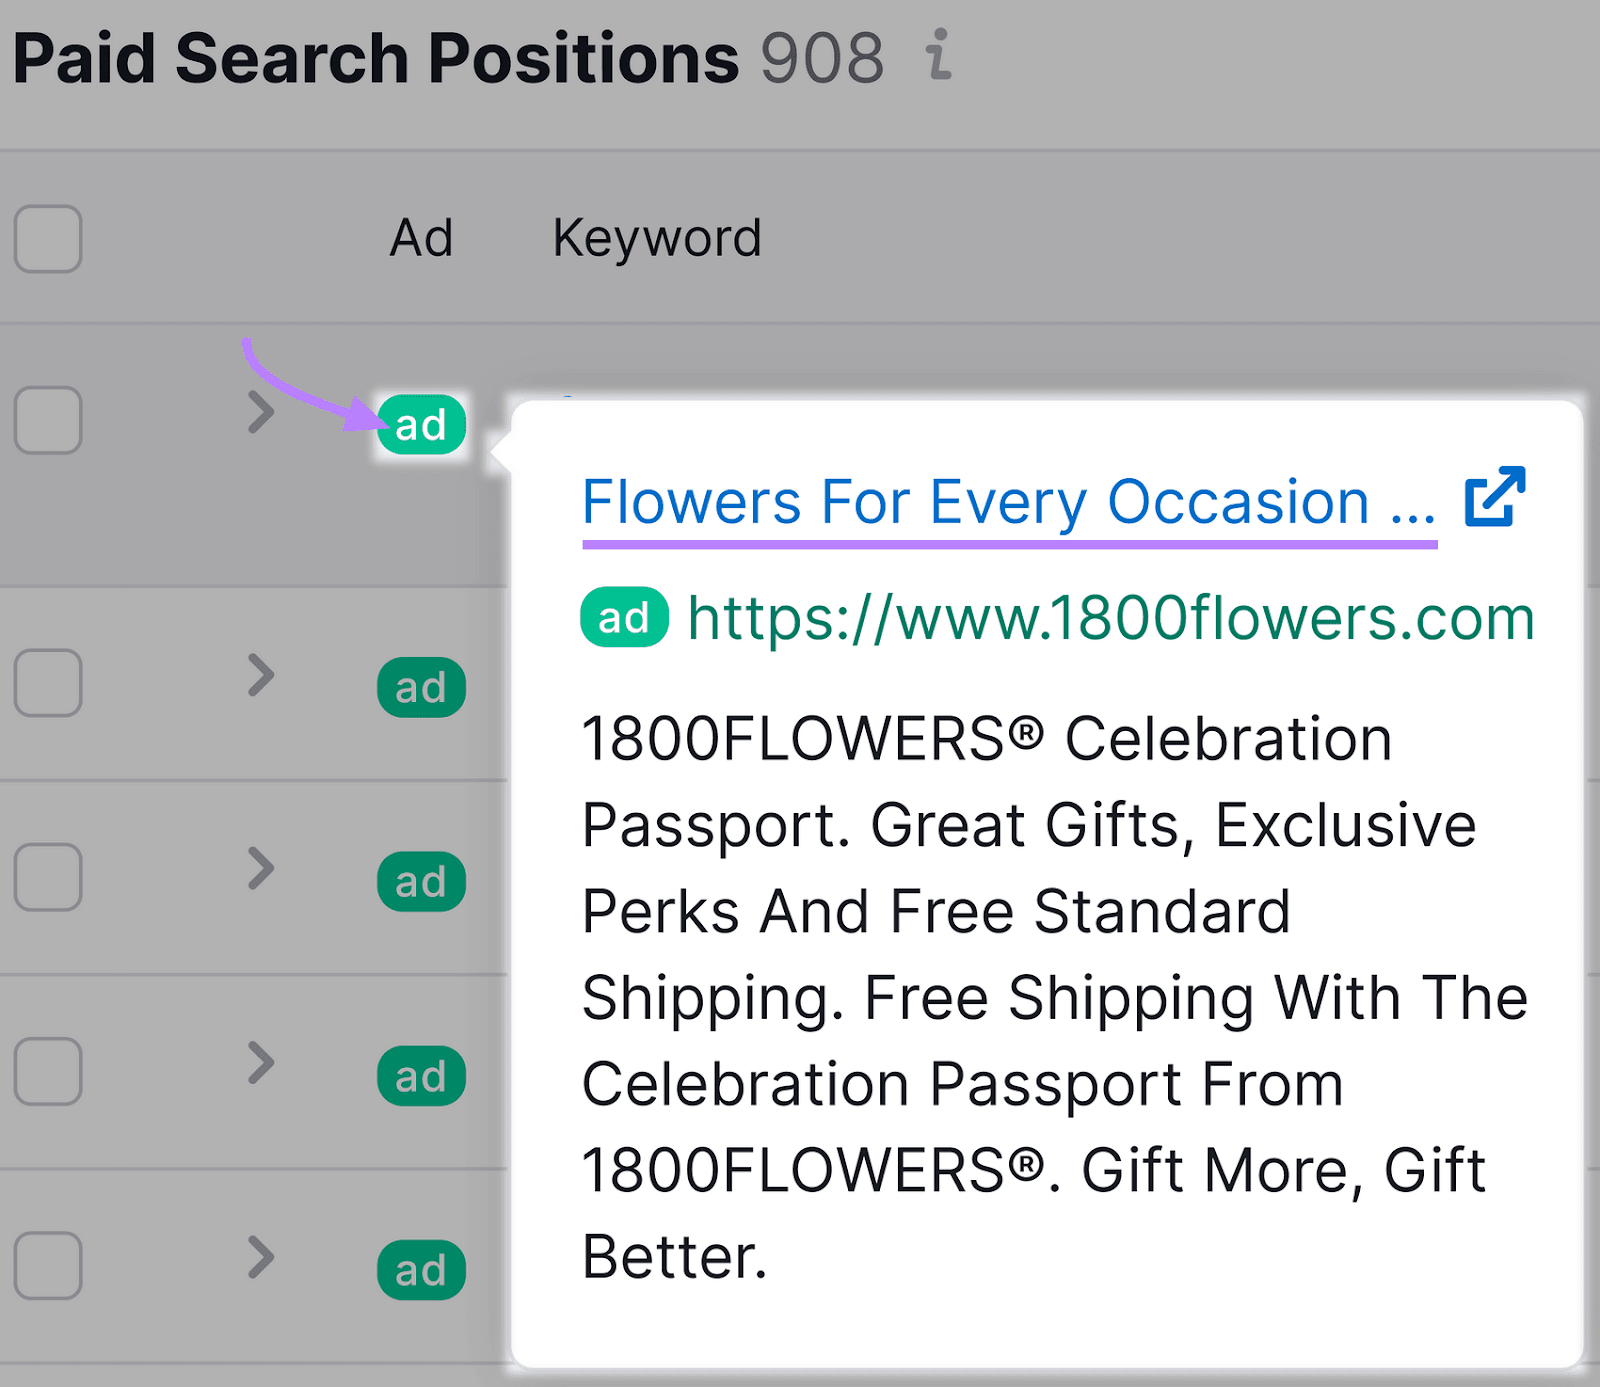 "Paid Search Positions" table, showing an expanded ad for the keyword "flowers" with the title "Flowers For Every Occasion."